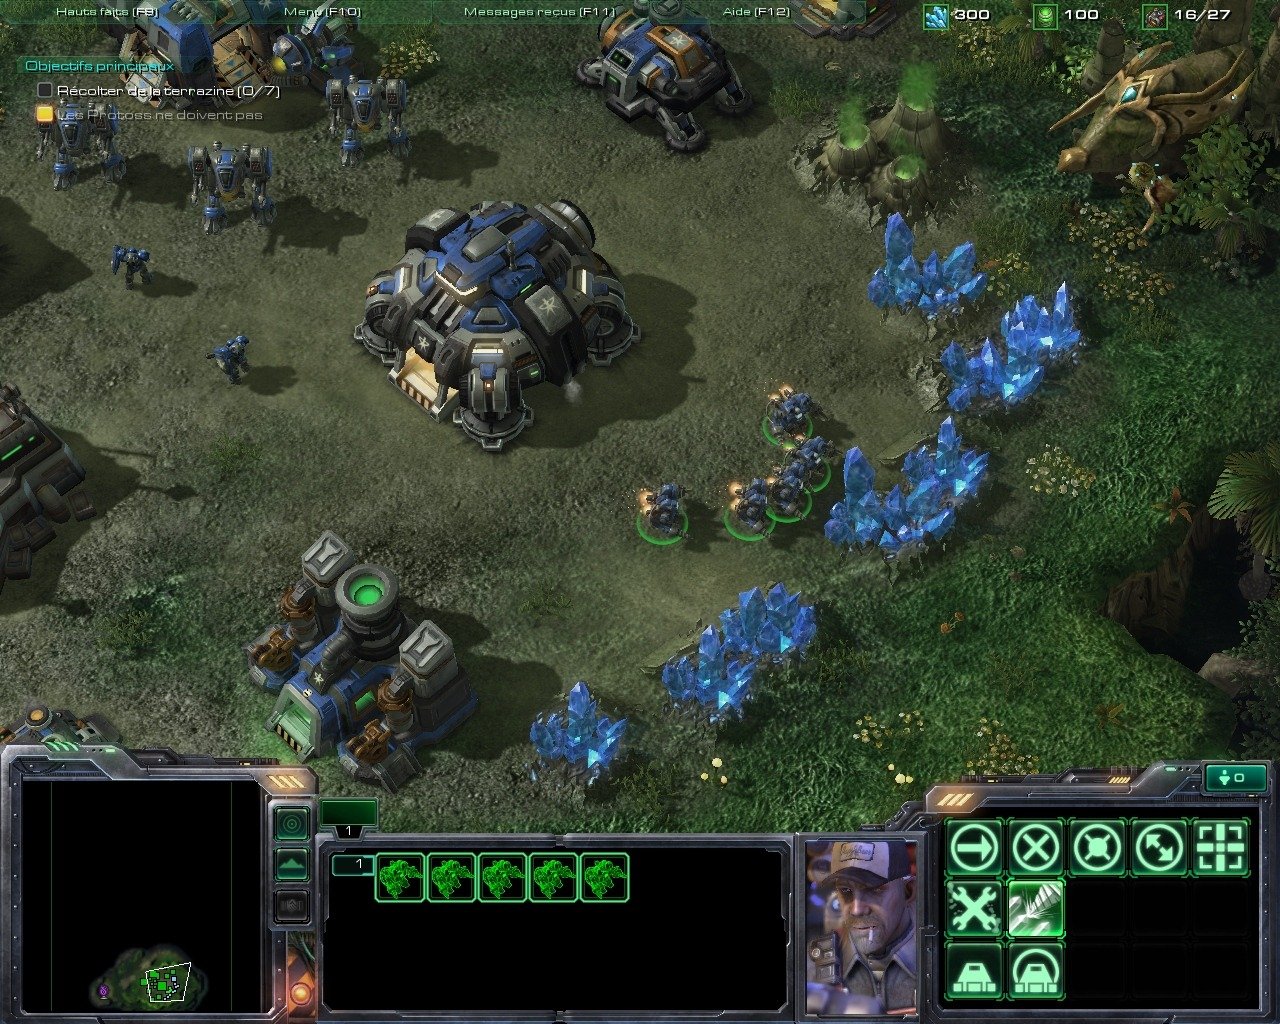 http://image.jeuxvideo.com/images/pc/s/t/starcraft-ii-wings-of-liberty-pc-399.jpg